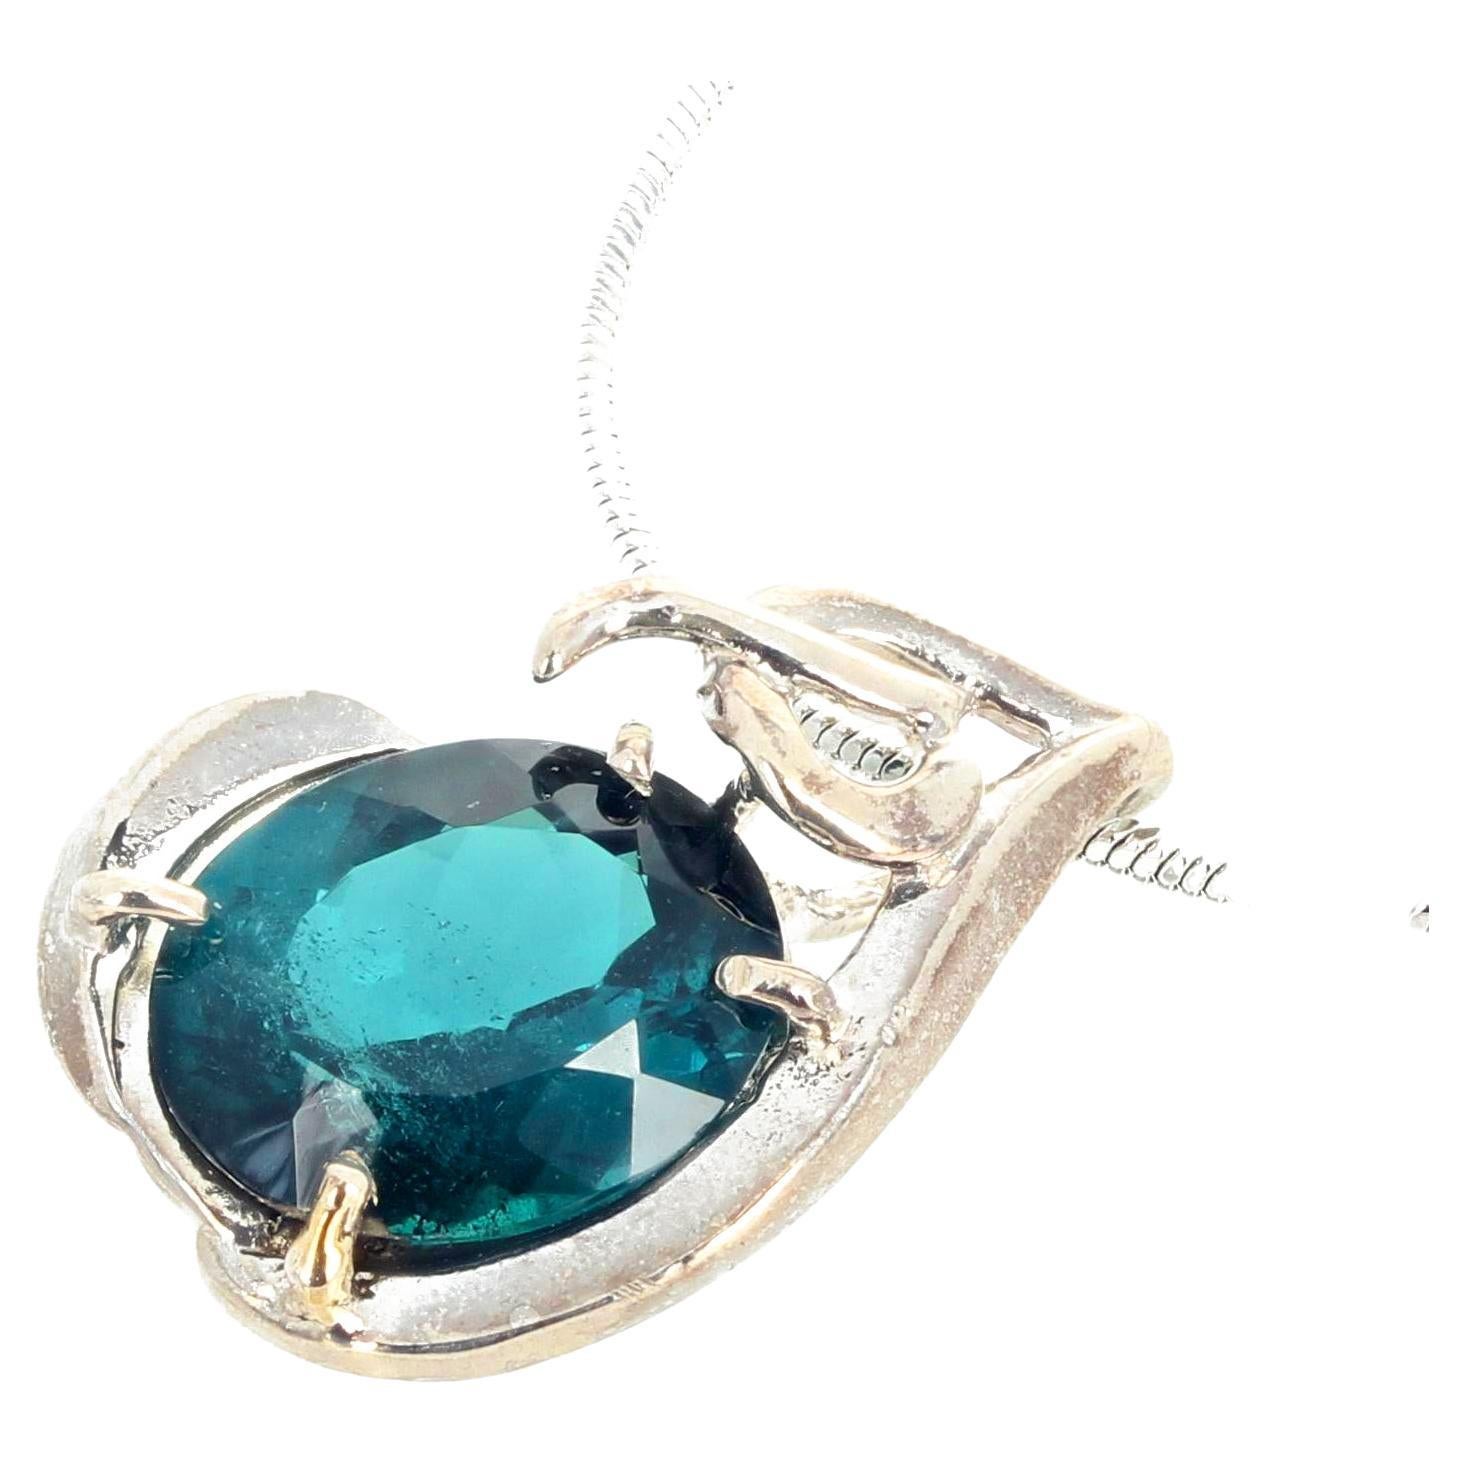 AJD Stunning 5.5 Cts Bluegreen Glittering Tourmaline Sterling Silver Pendant  For Sale